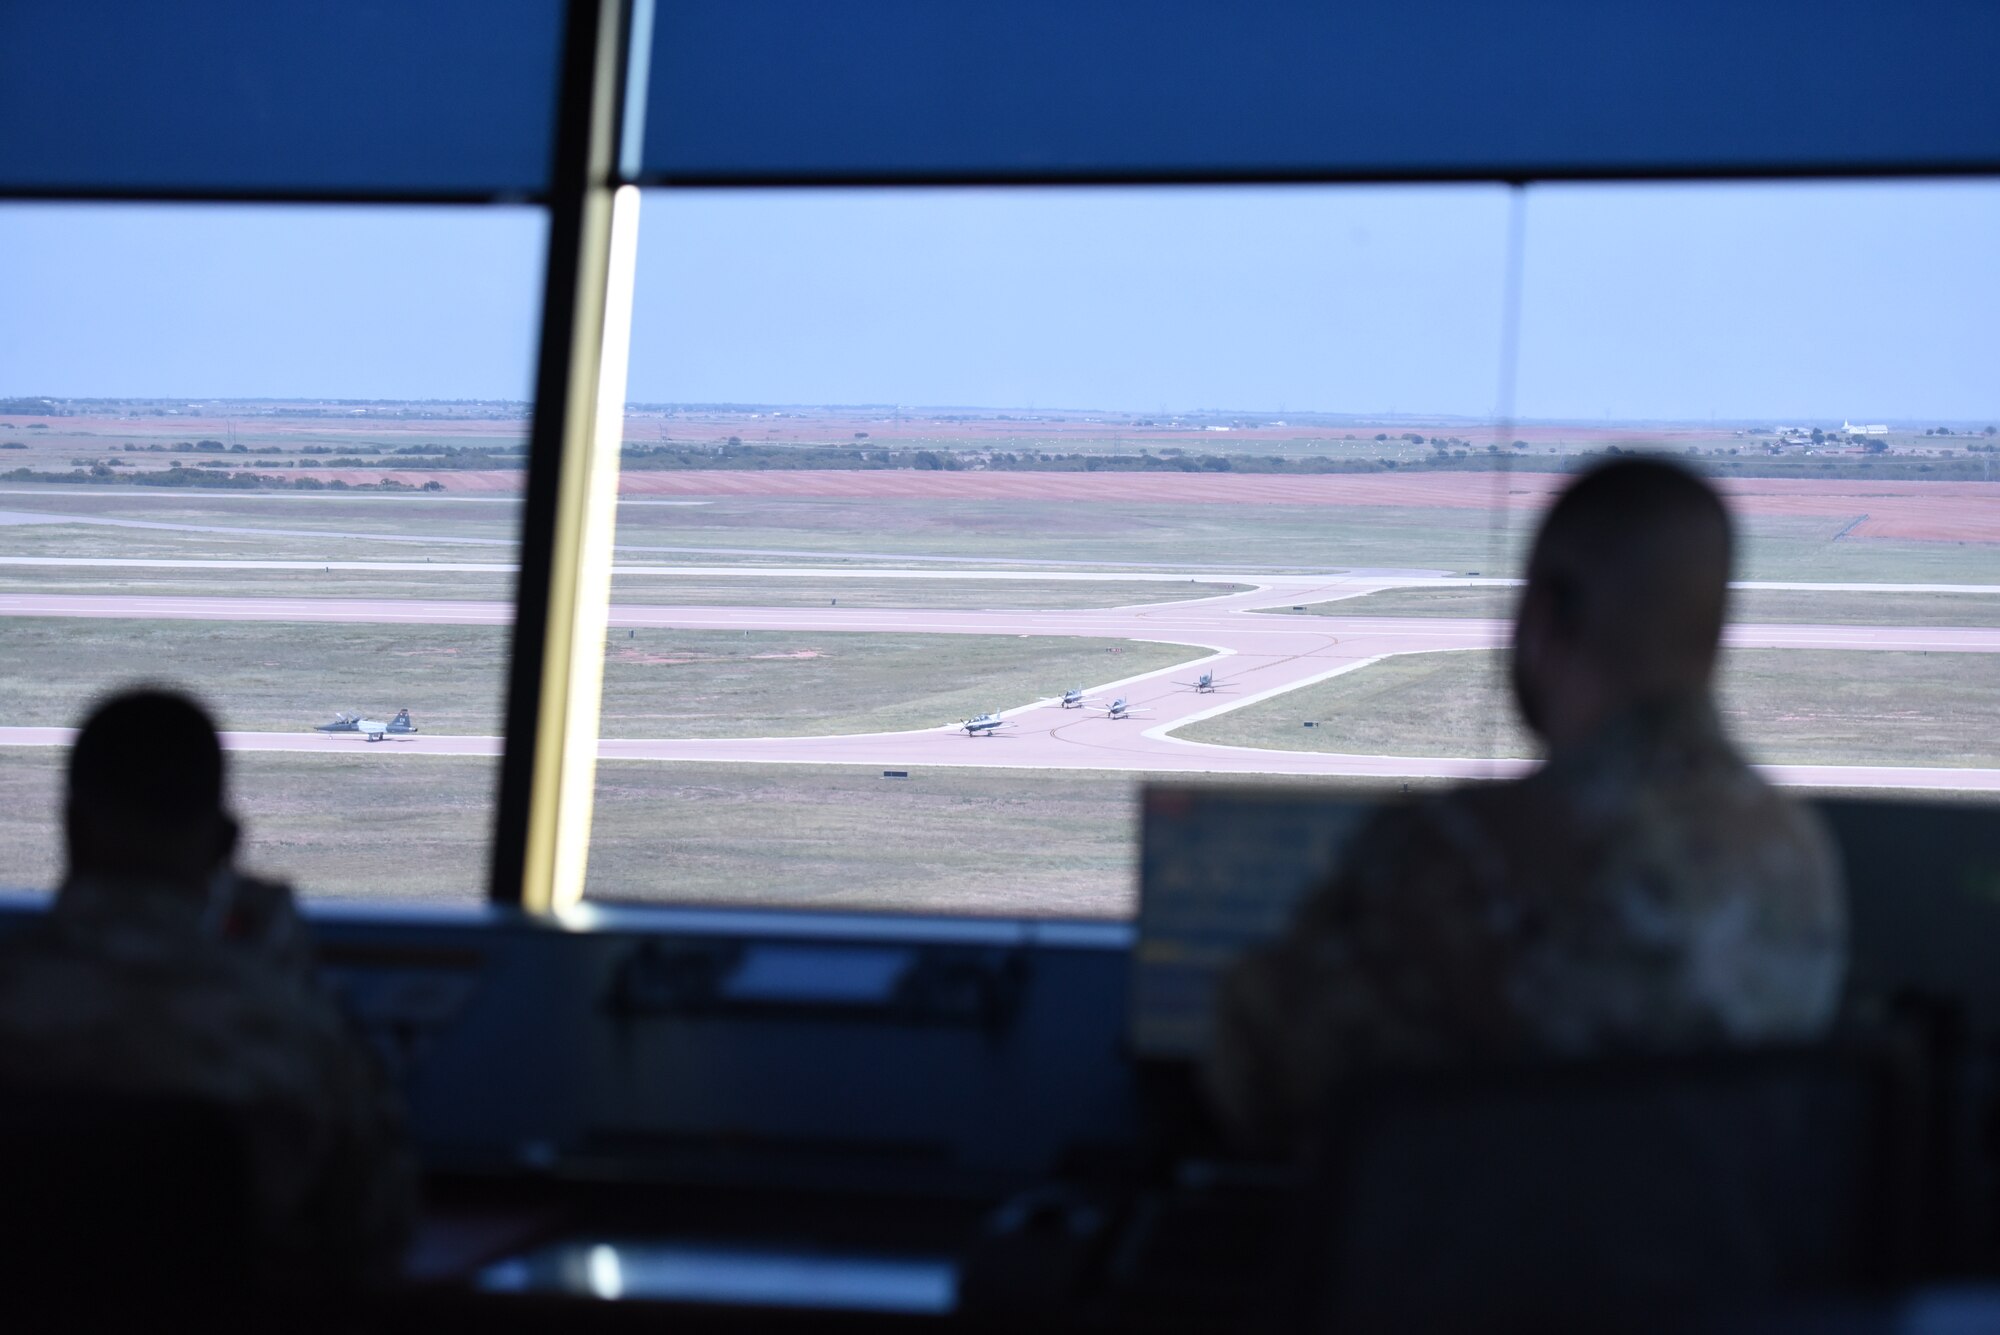 Two blurry figures look out of air traffic control tower window at in-focus jets below